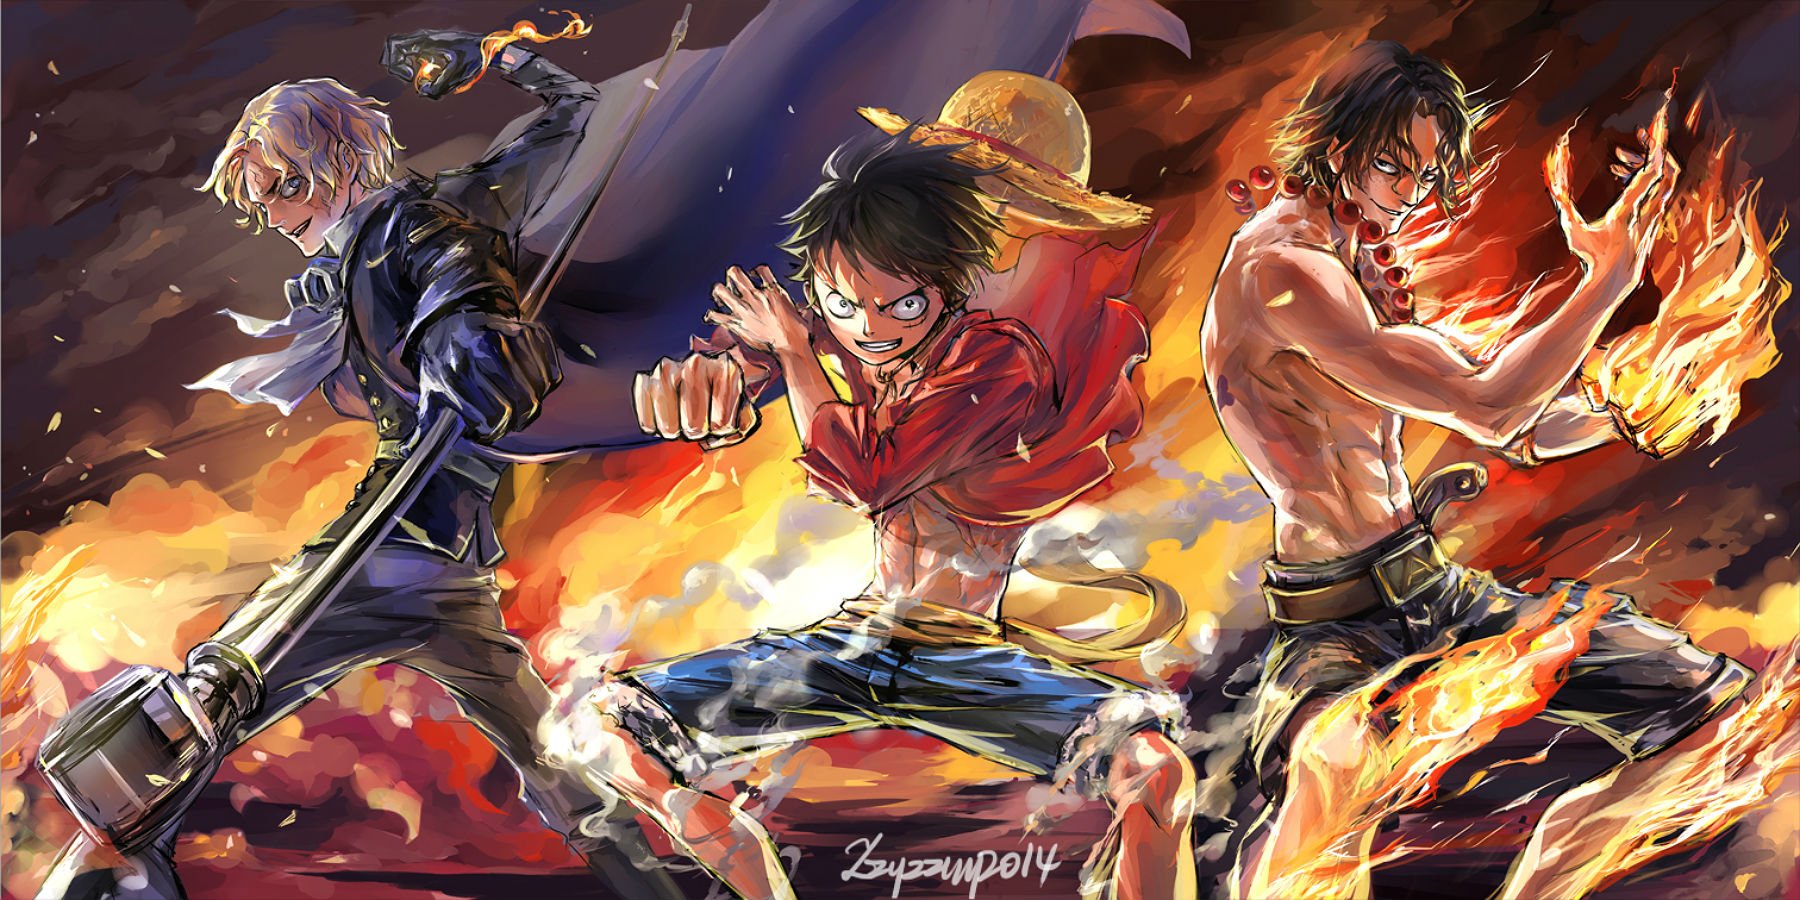 Free HD one piece, anime, monkey d luffy, portgas d ace, sabo (one piece), flame